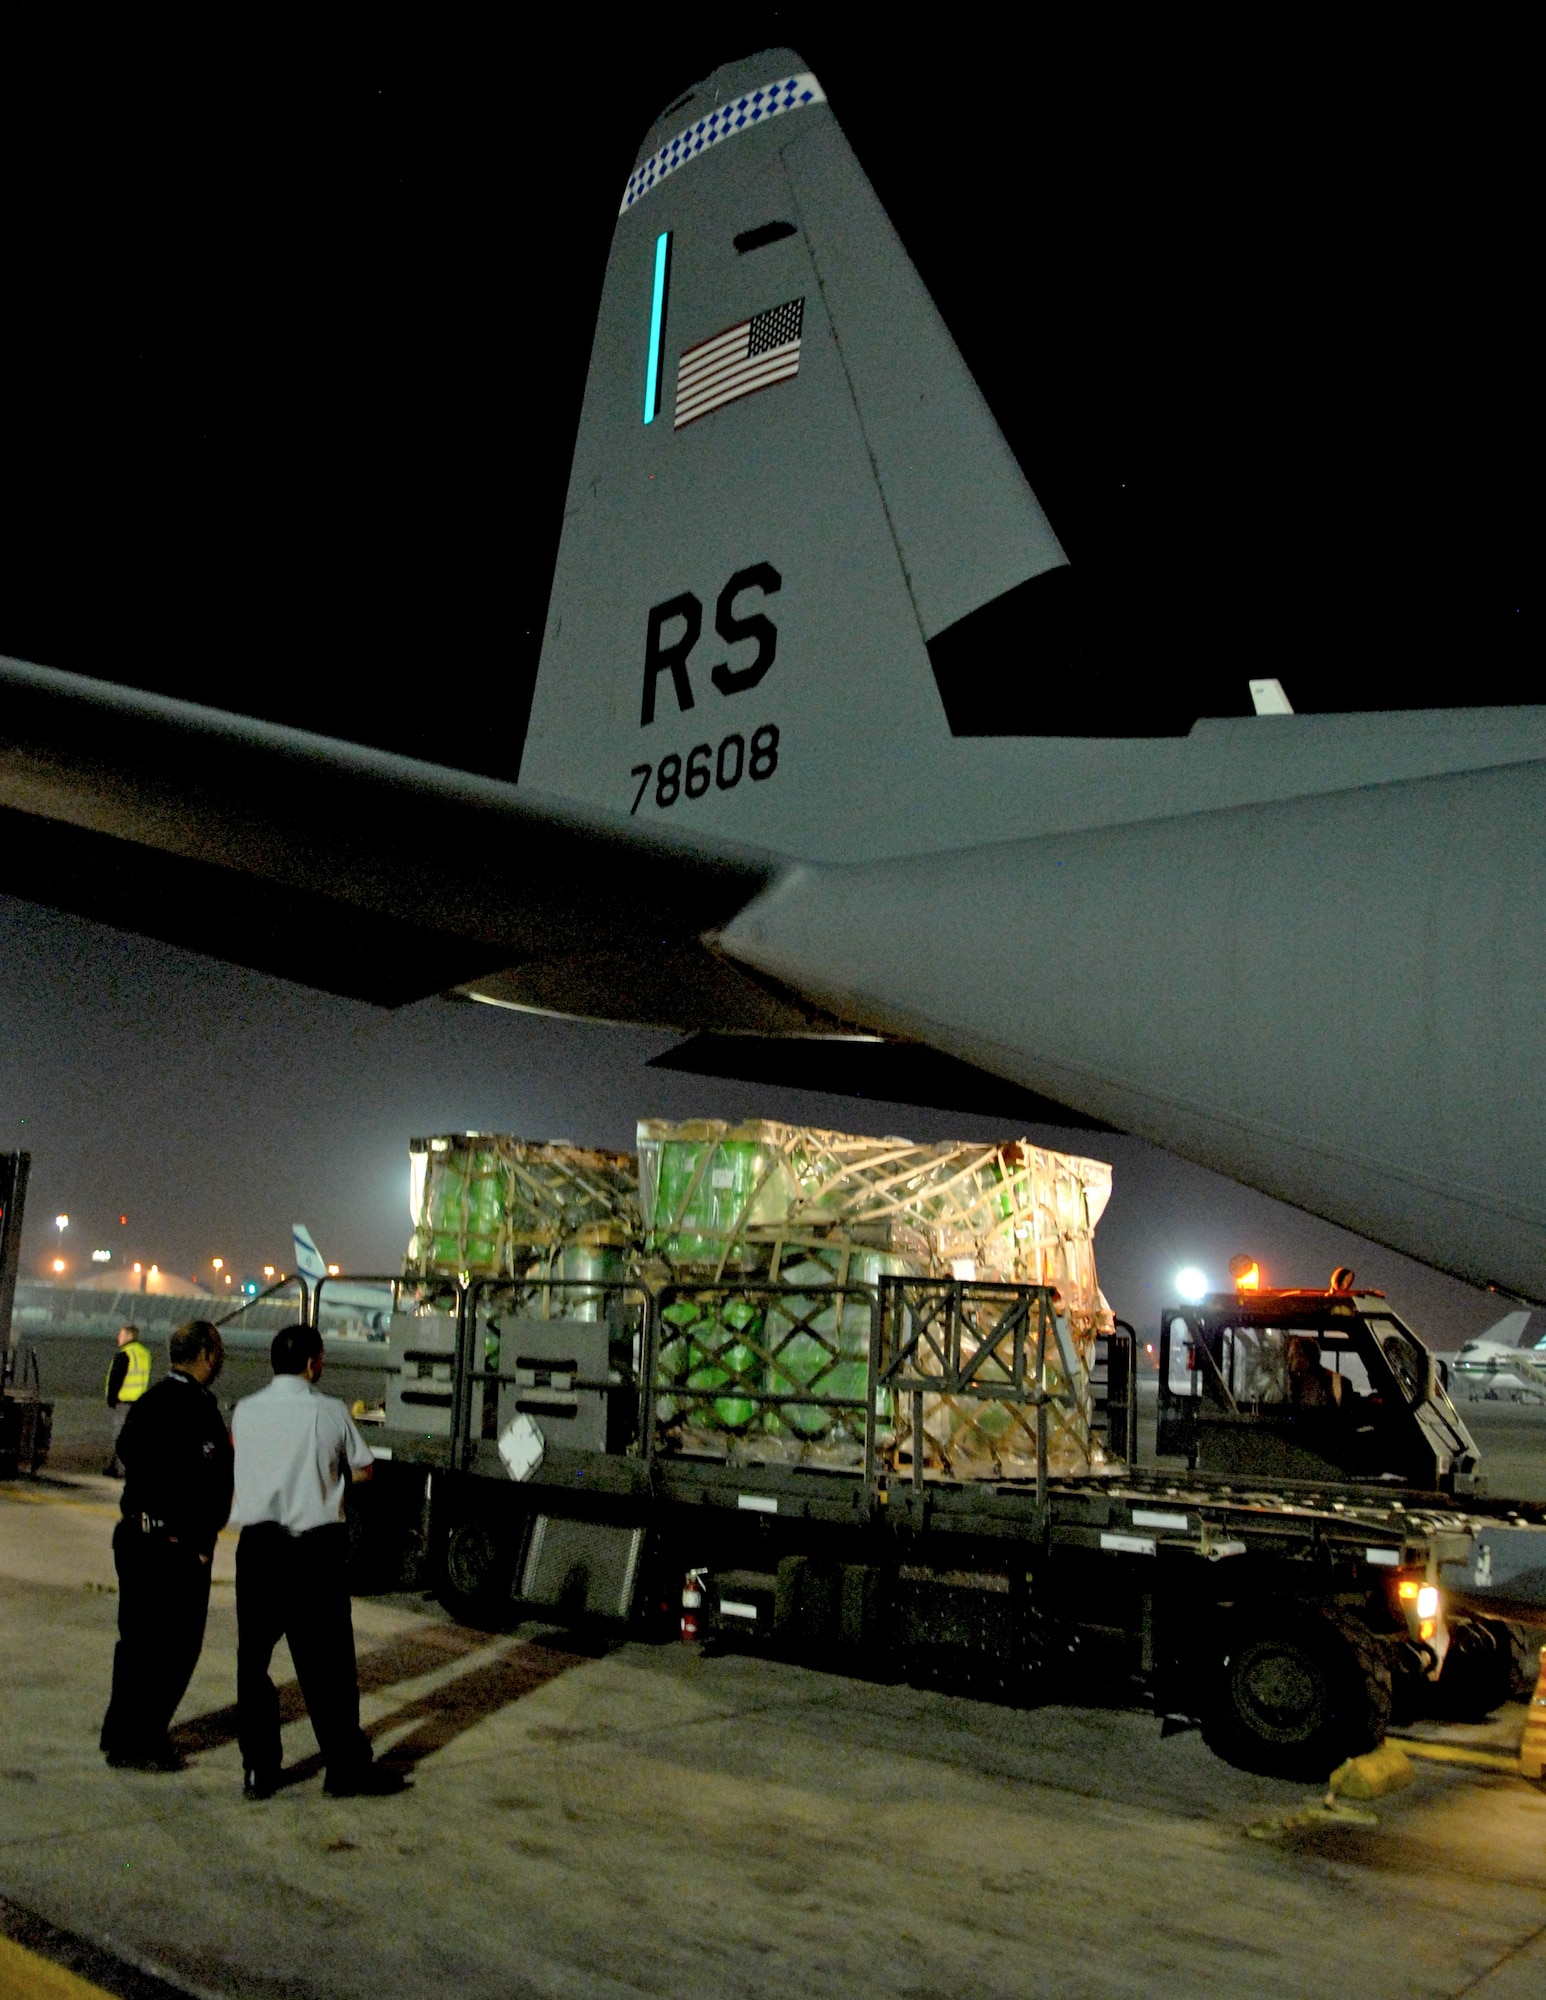 TEL AVIV, Israel – Israeli officials offload approximately 13.5 tons of fire suppression agent from a C-130J aircraft from Ramstein Air Base, Germany, onto an Israeli K-loader Sunday, Dec. 5, 2010, at Tel Aviv International Airport. So far the United States has donated 30,000 liters of fire retardant, with plans to deliver 60,000 more over the next three days to aid firefighting efforts in Israel. (U.S. Air Force photo by Capt. John Ross)